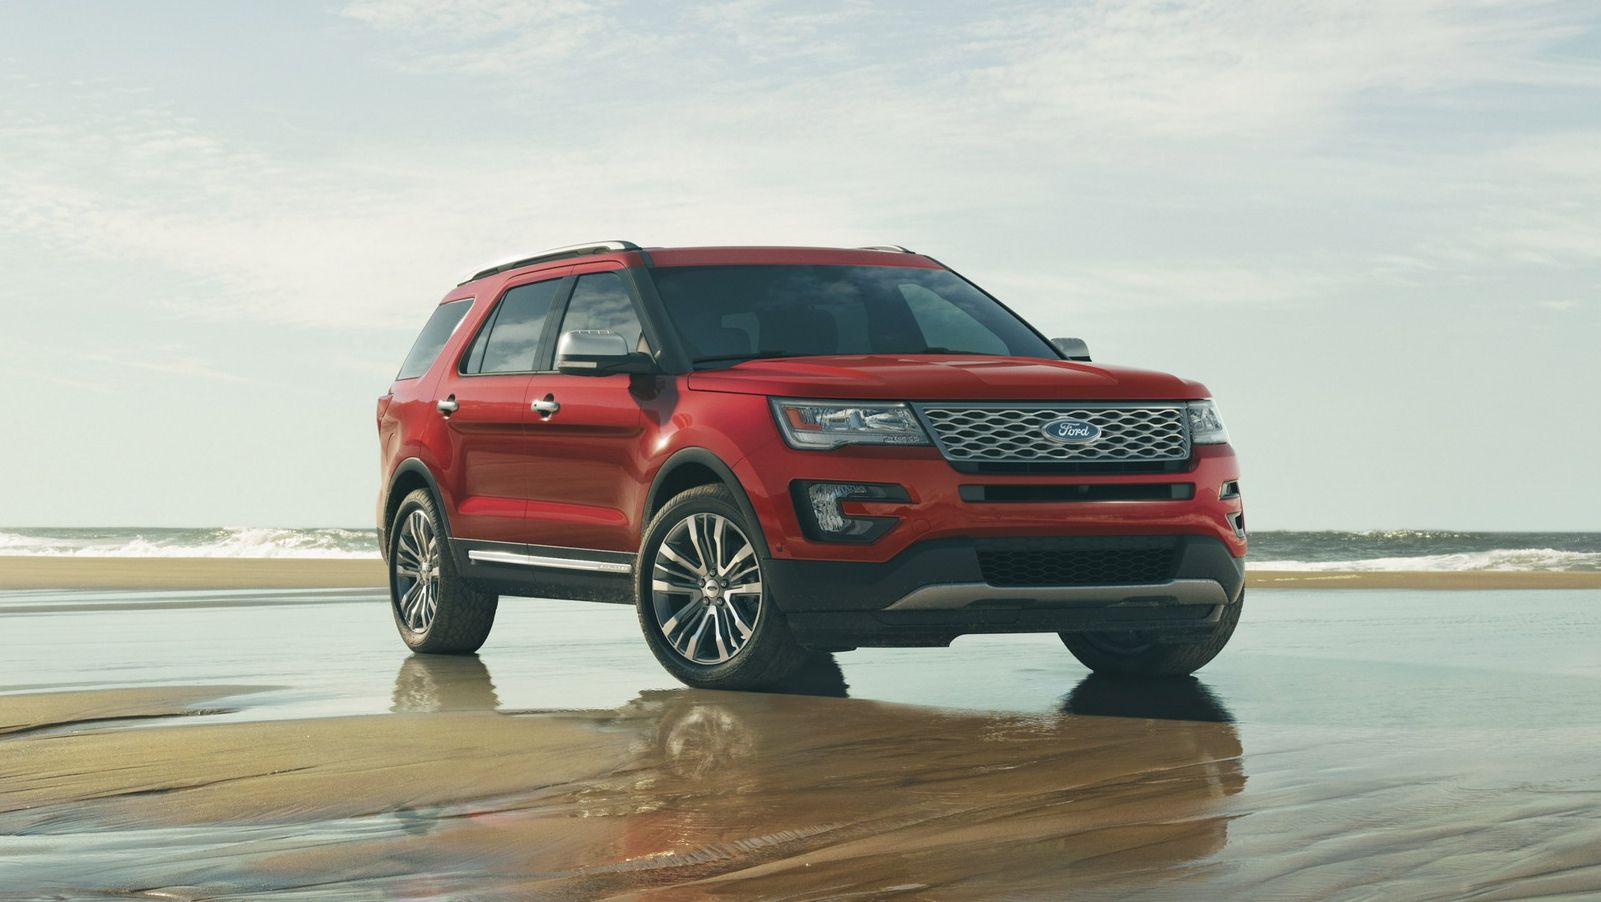  Check out the rged new look of the 2016 Explorer, and don't forget about the new Platinum trim level. 